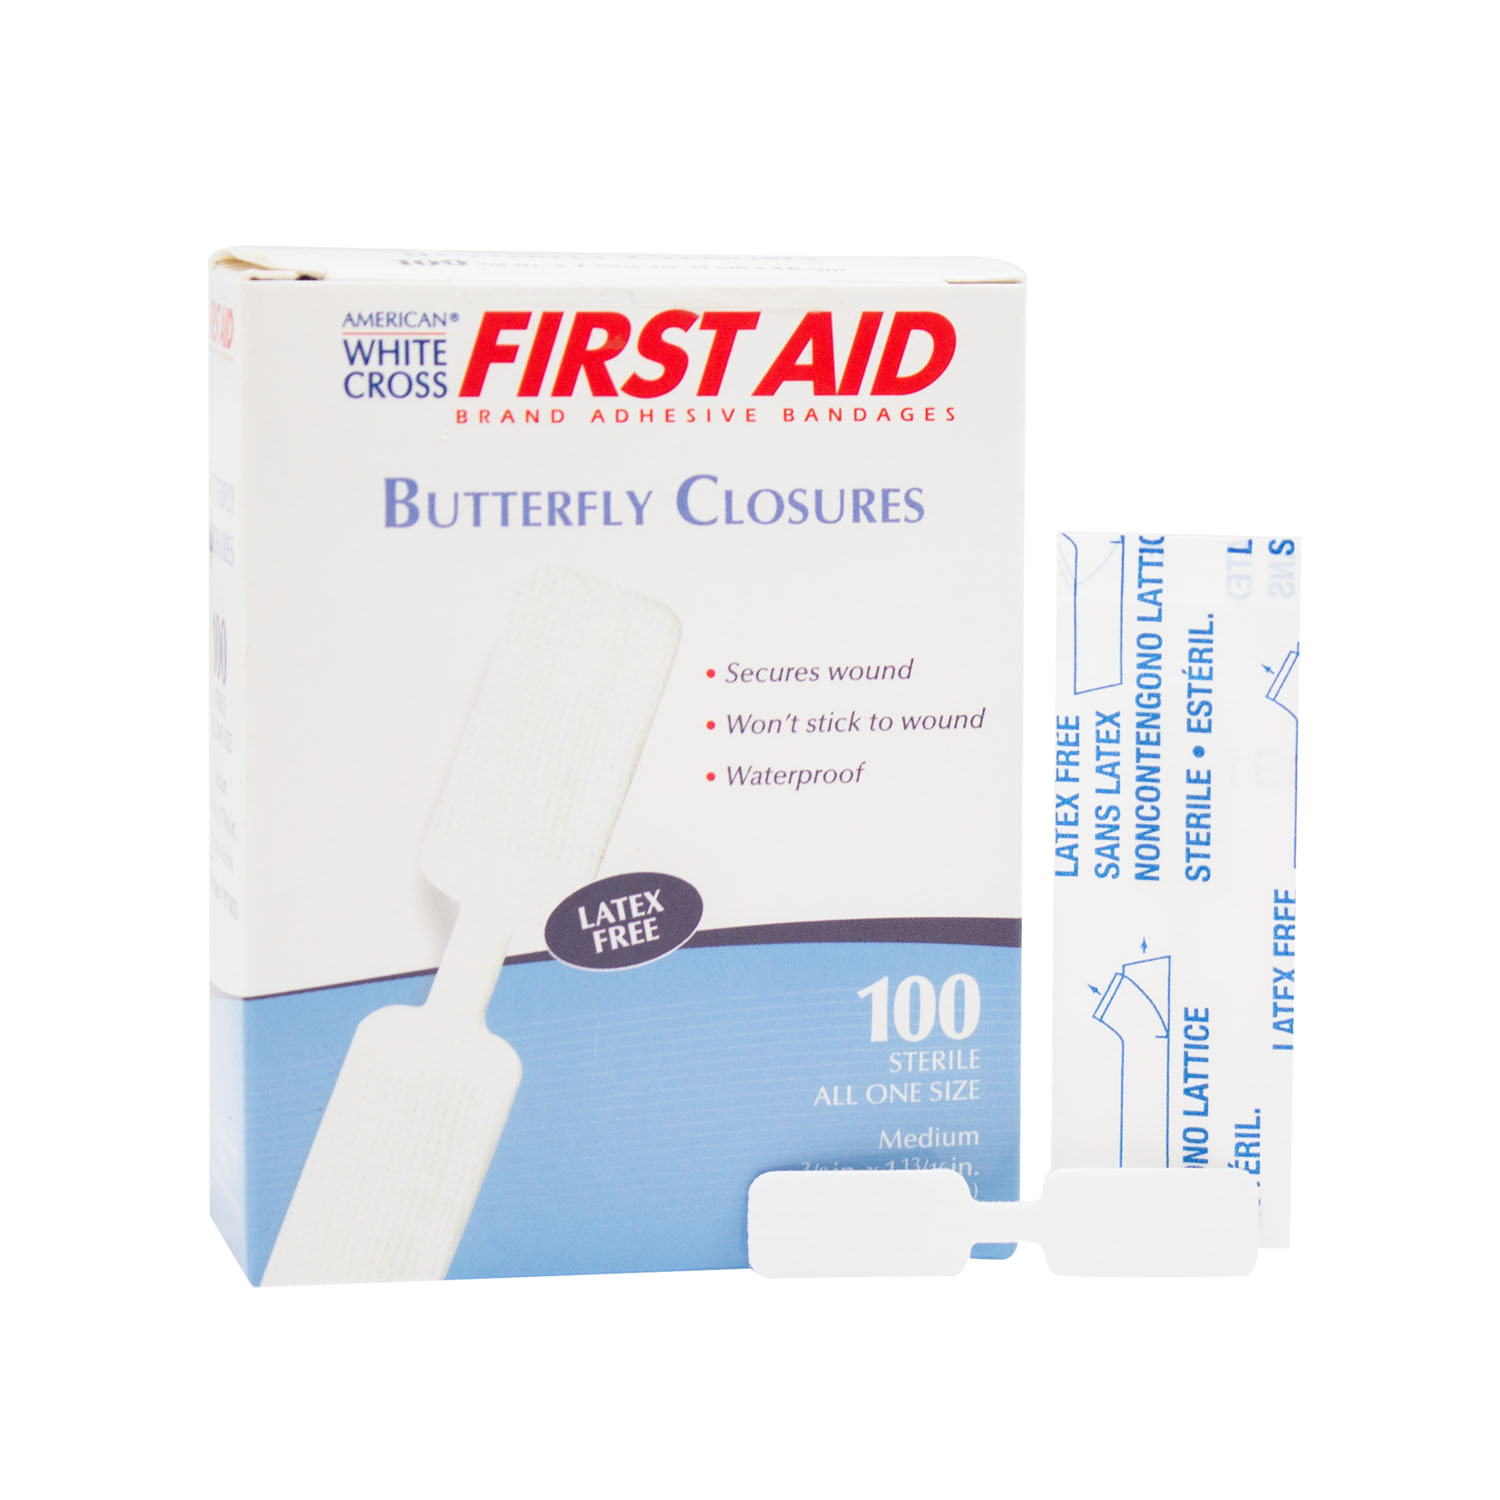 DUKAL BUTTERFLY CLOSURES ADHESIVE BANDAGES : 1975033 BX $5.37 Stocked